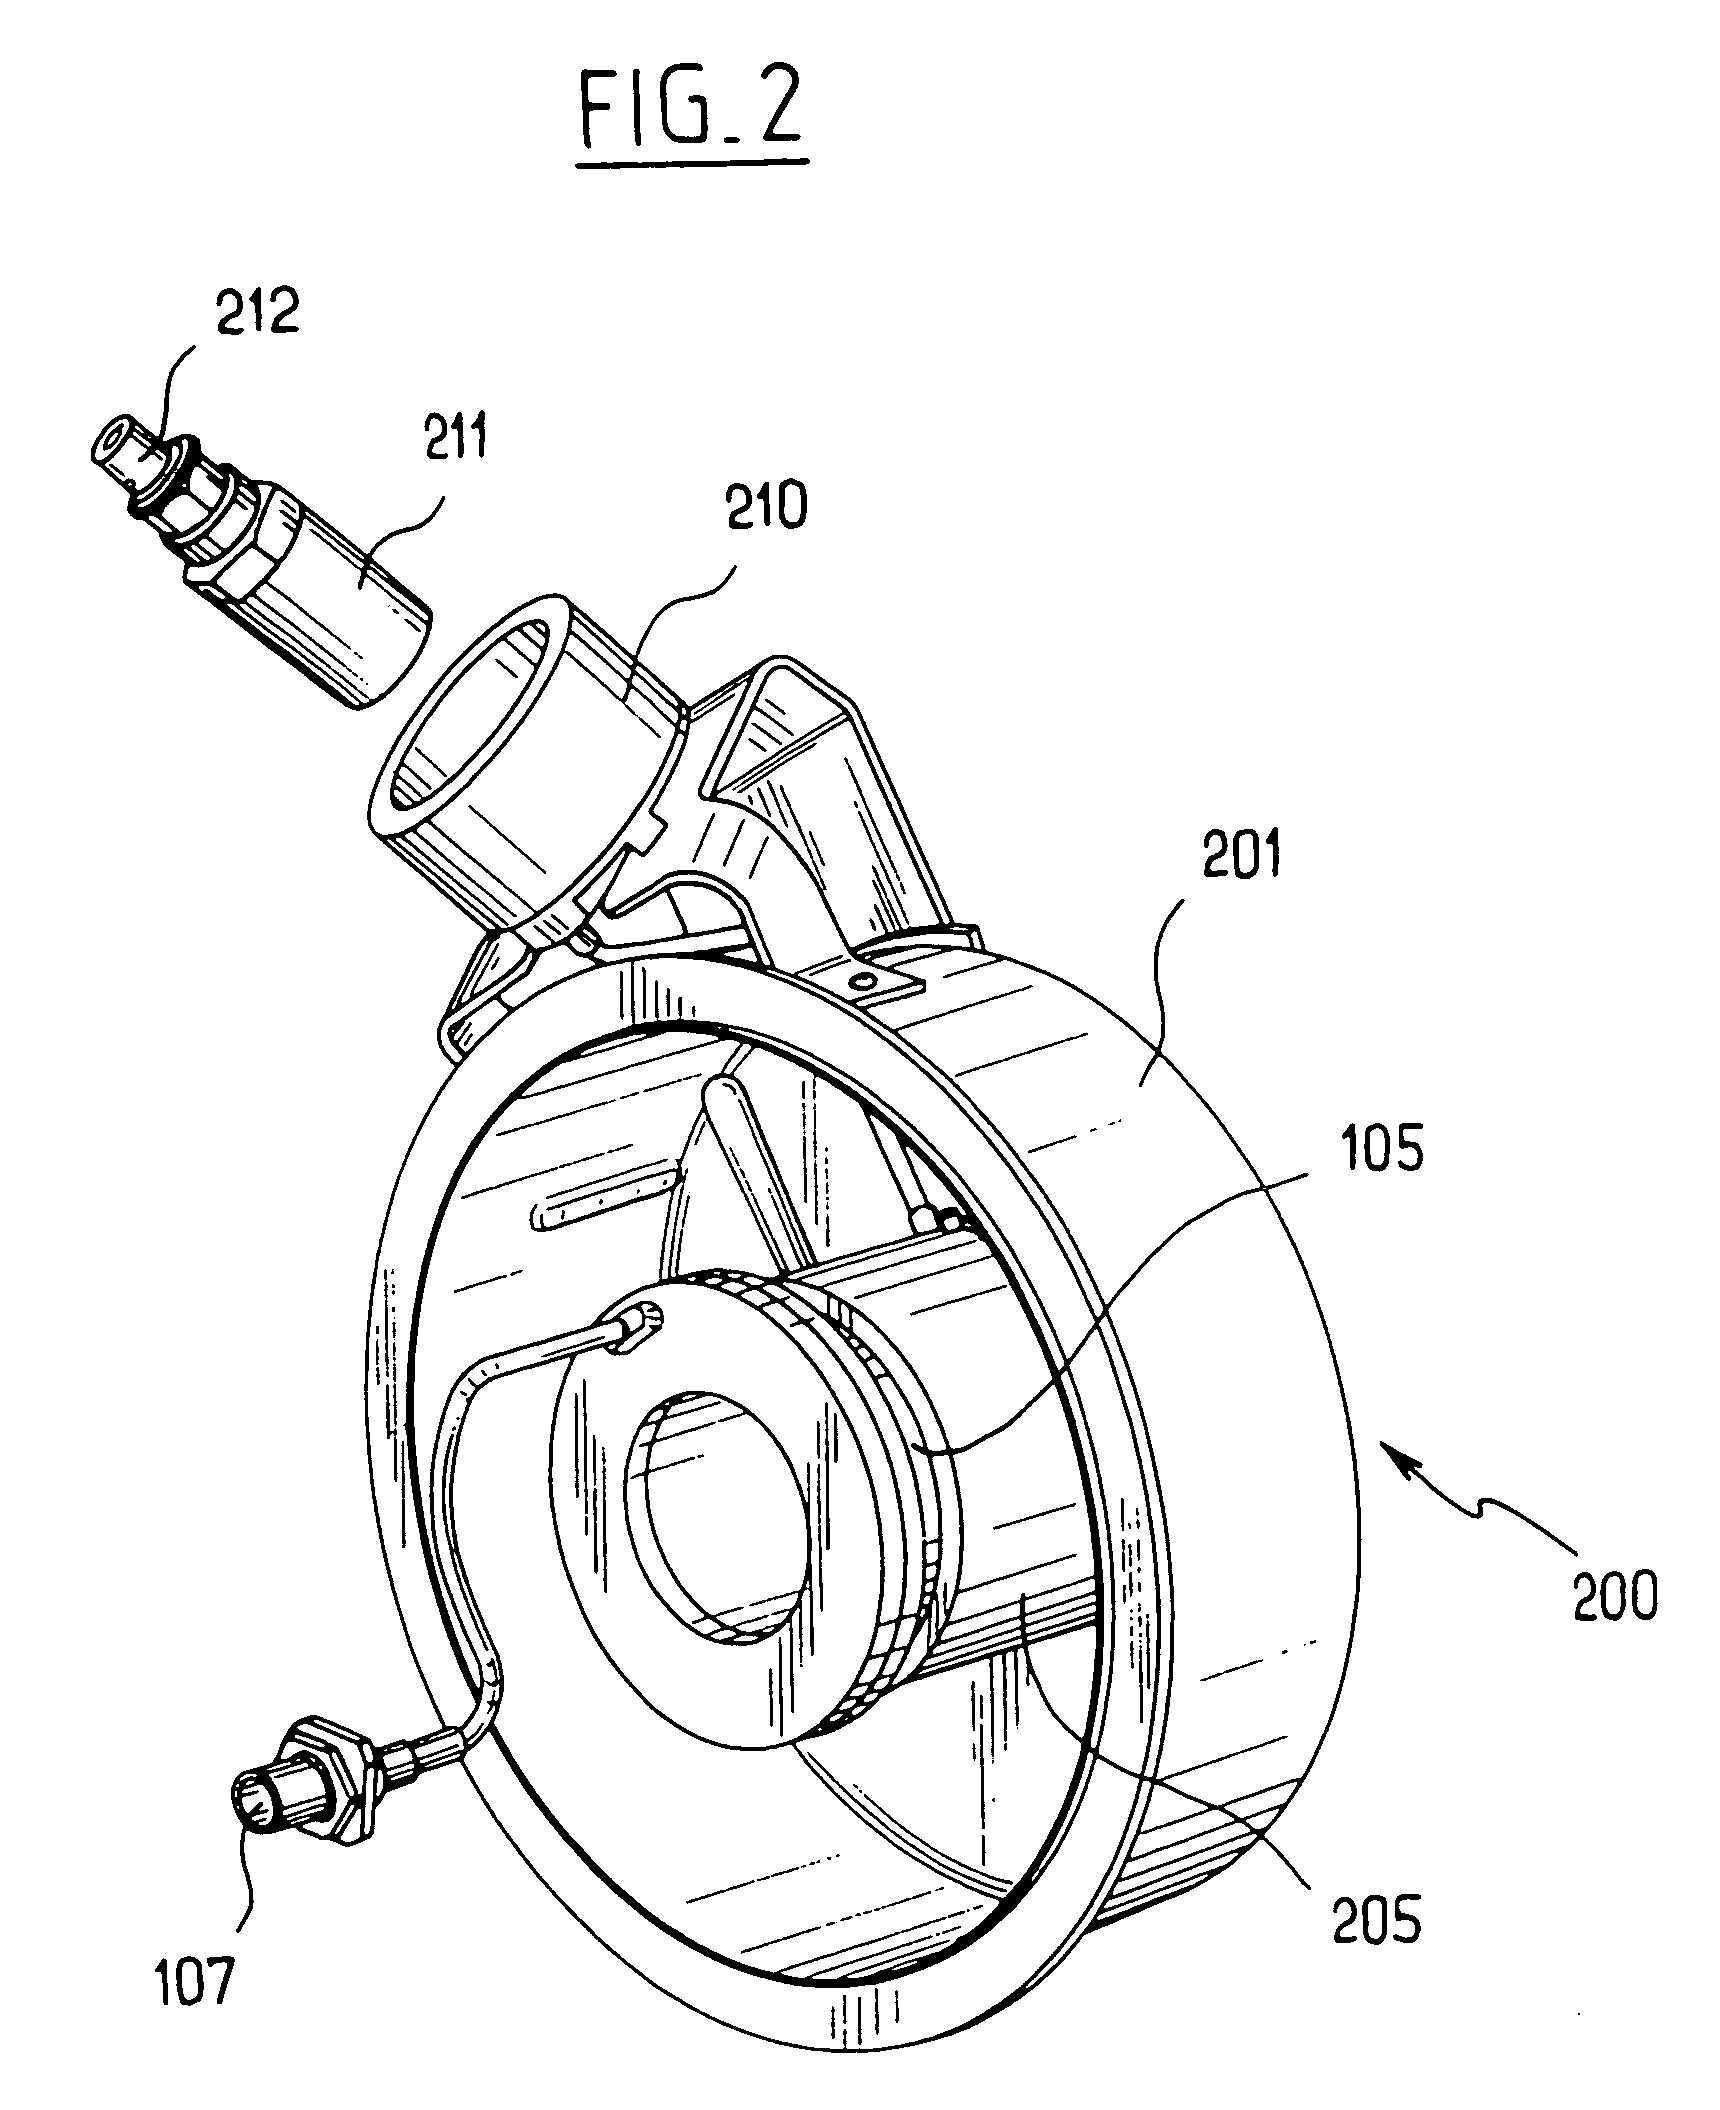 Axle end equipment for a vehicle, in particular an aircraft